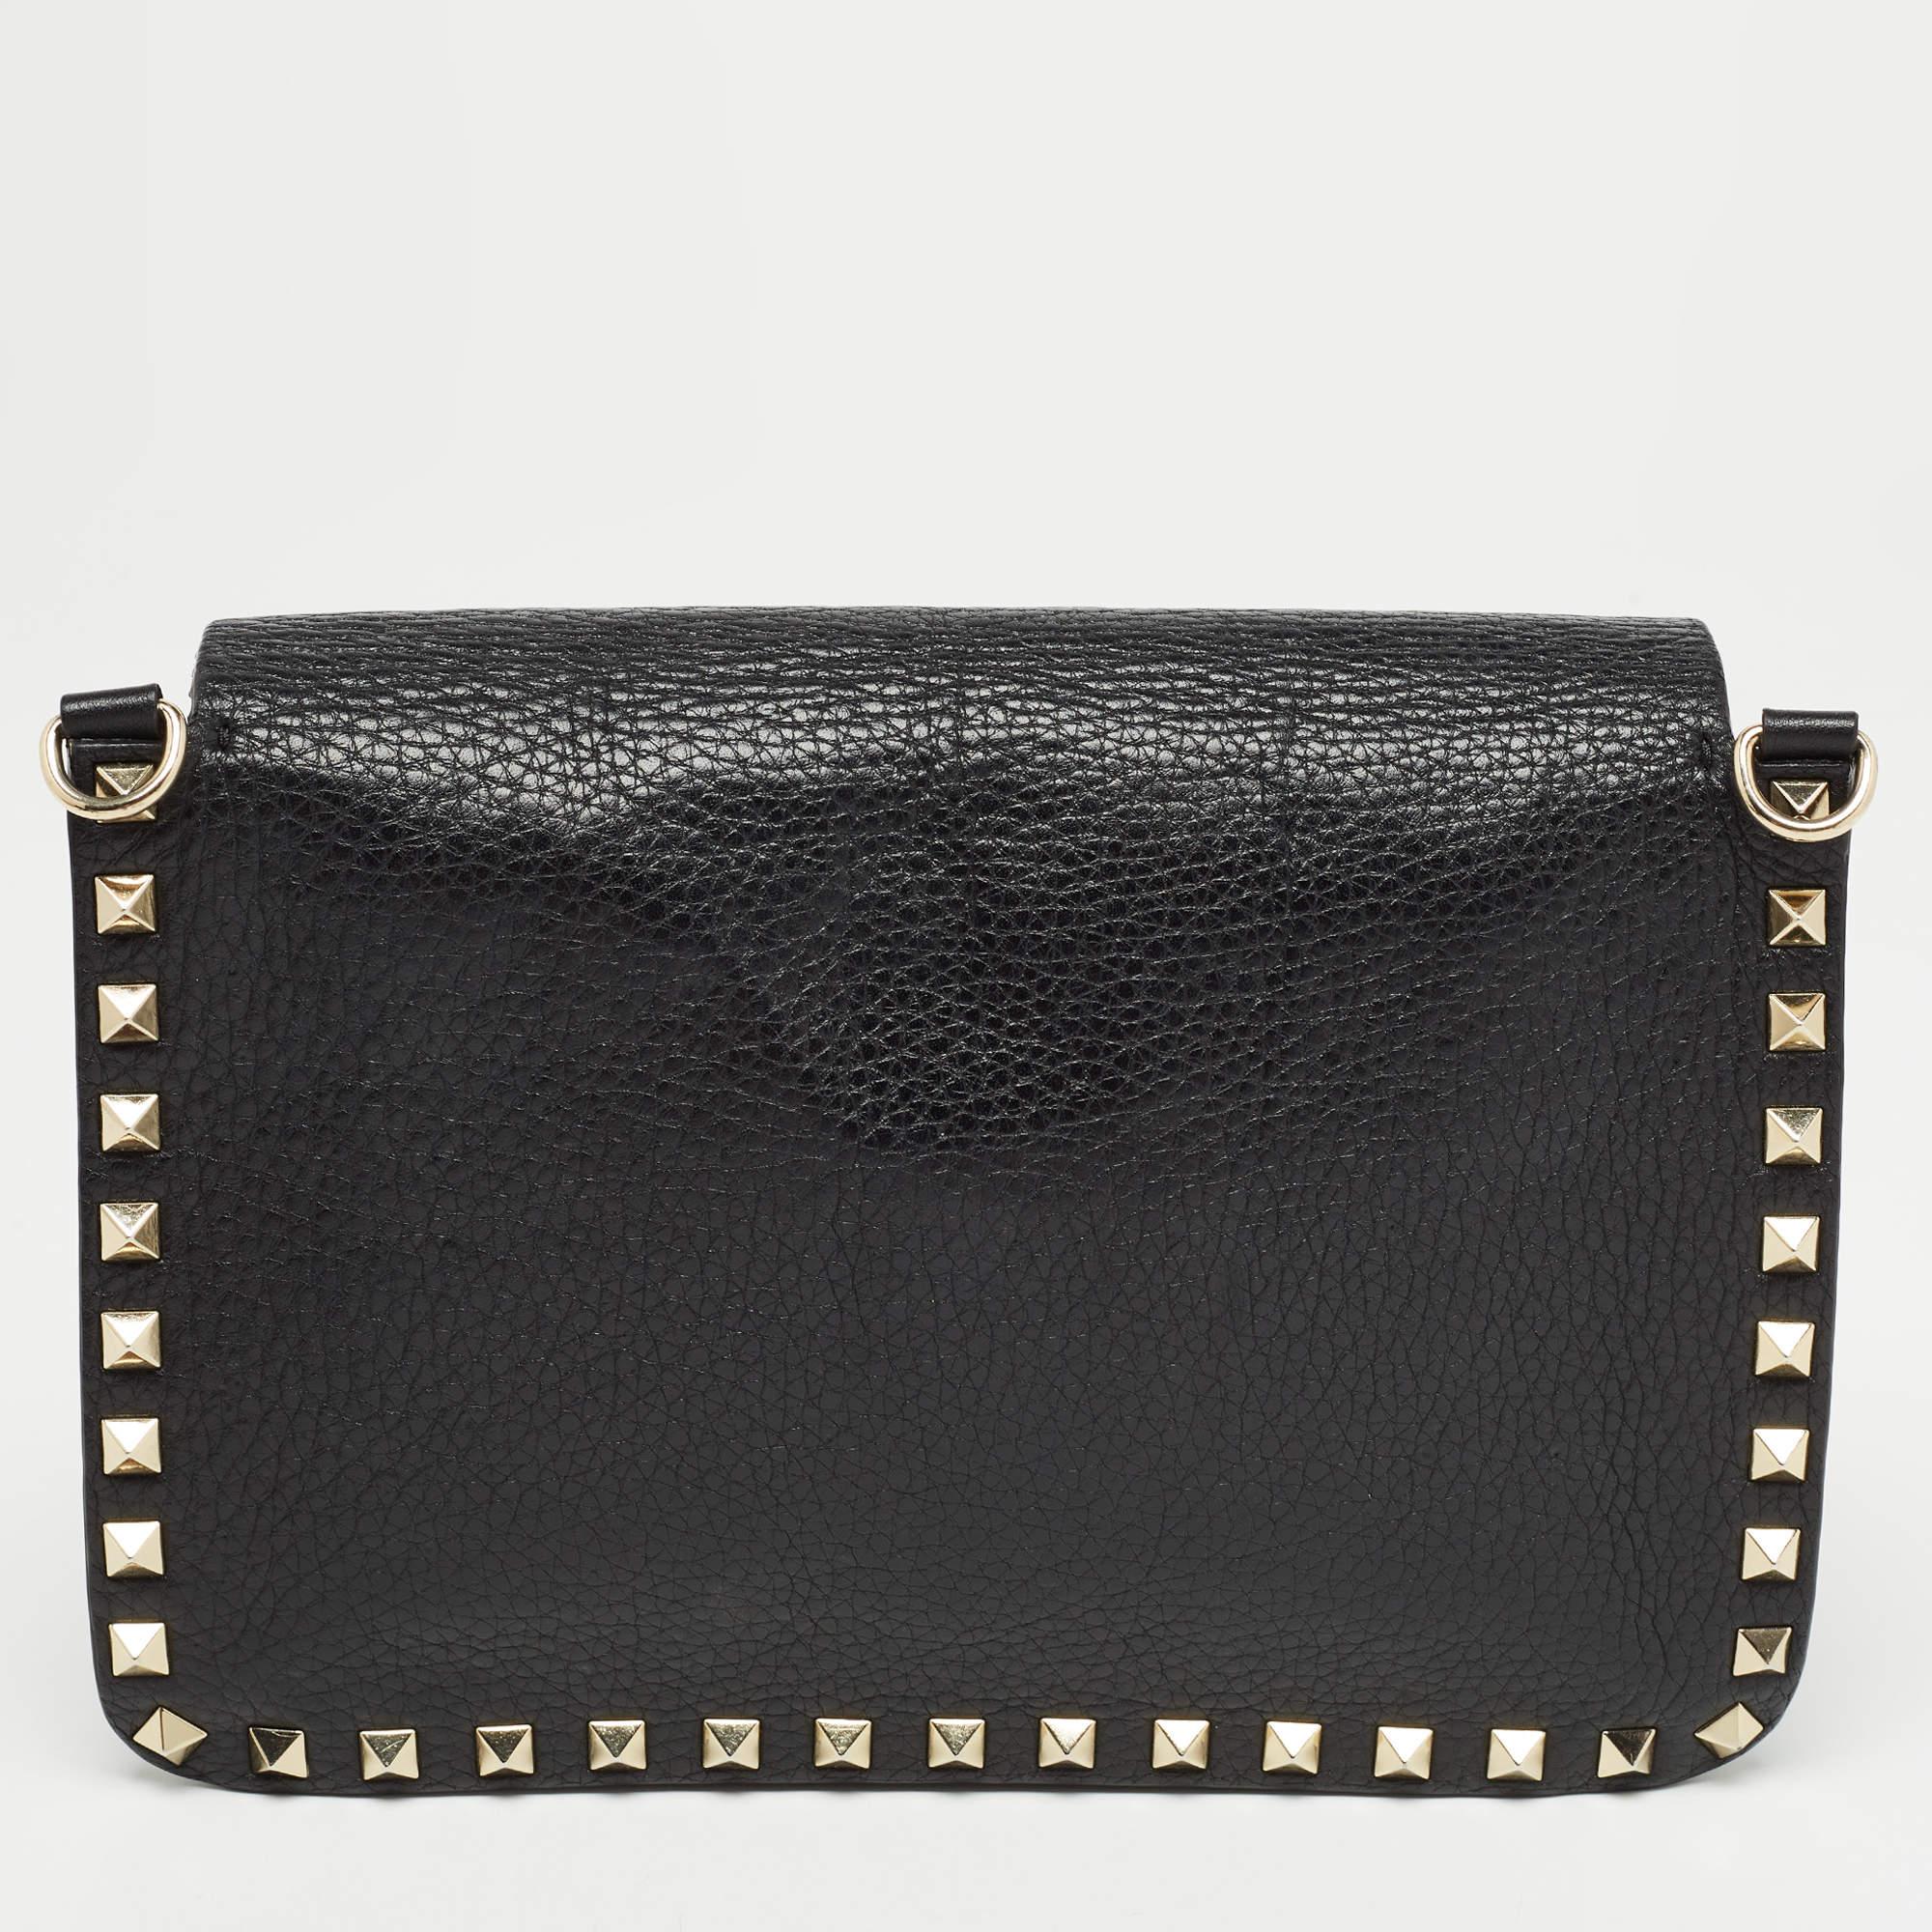 This Rockstud crossbody bag from the house of Valentino is a beauty. Crafted from black leather, the exterior features gold-tone studs and the full flap opens to a suede-lined interior for your essentials. This exquisite bag is perfect for a host of